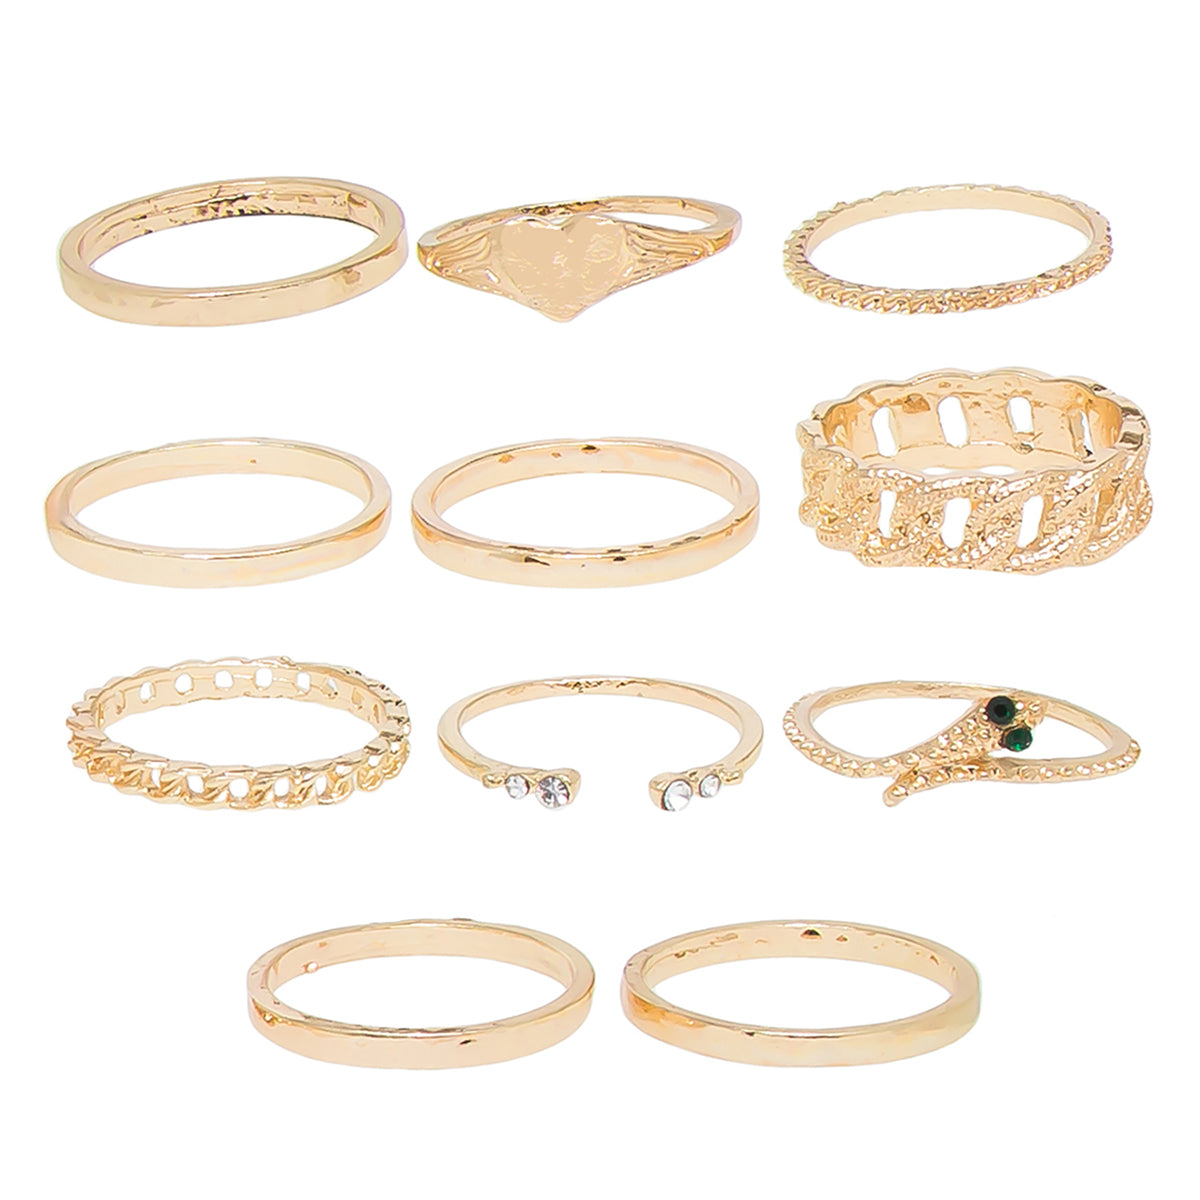 Buy Gold Rings for Women by Yellow Chimes Online | Ajio.com